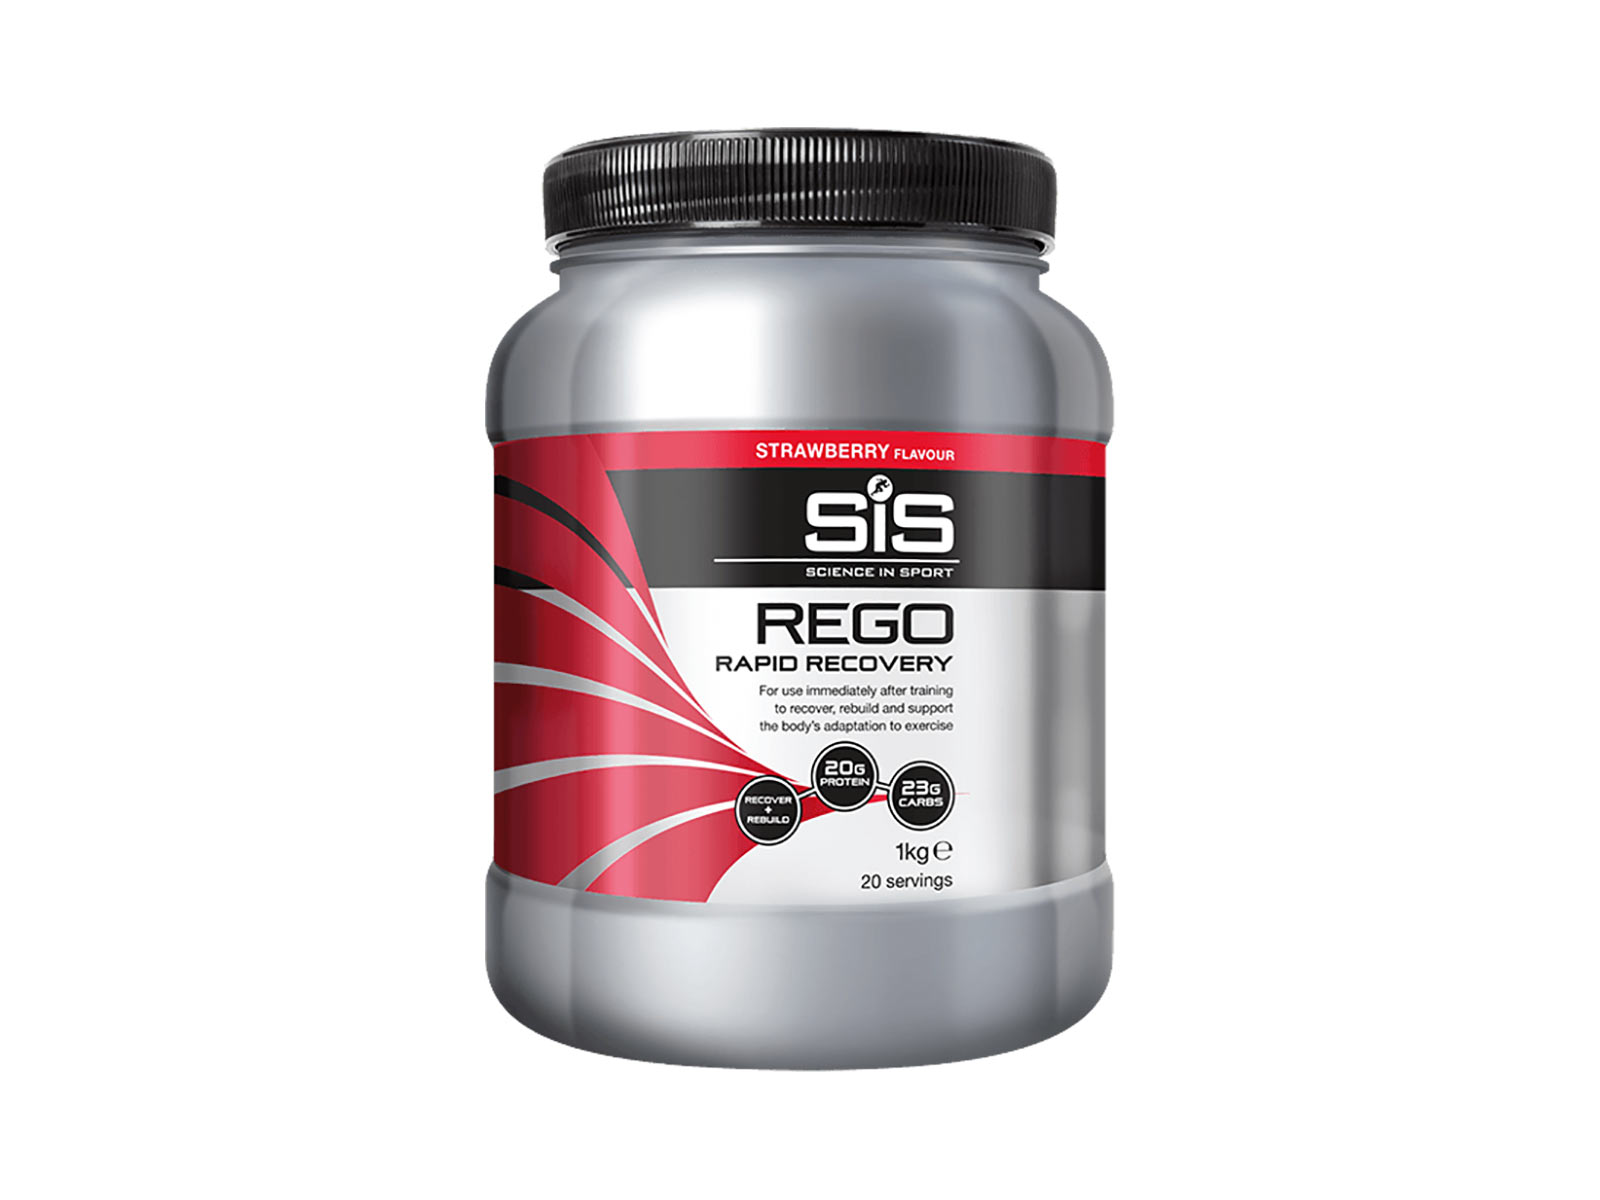 SiS REGO Rapid Recovery Powder 1kg